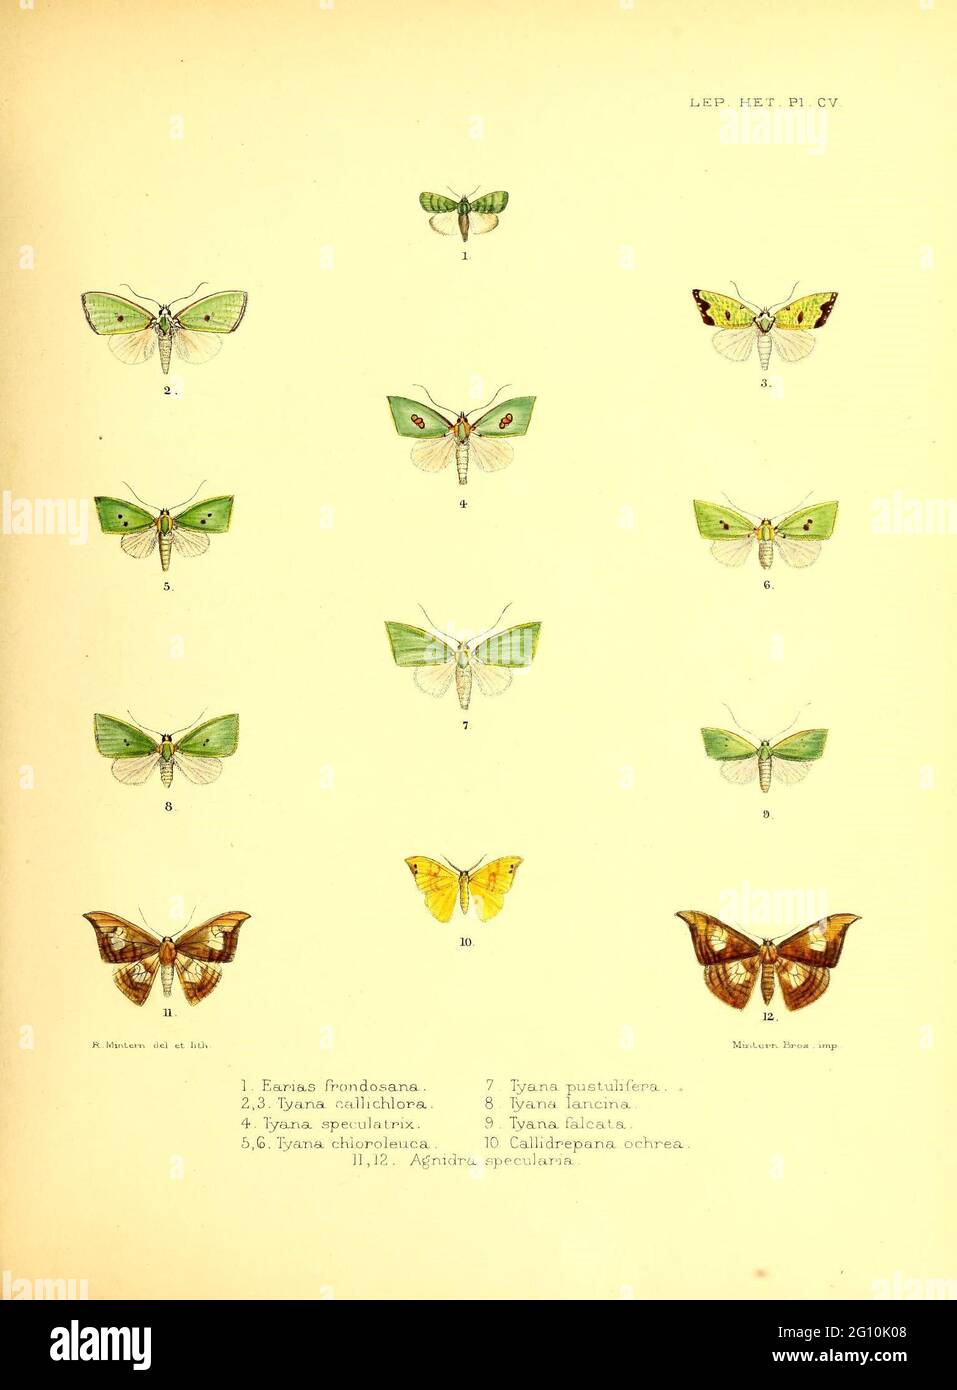 Illustrations of typical specimens of Lepidoptera Heterocera in the collection of the British Museum London :Printed by order of the Trustees,1877-93. Stock Photo